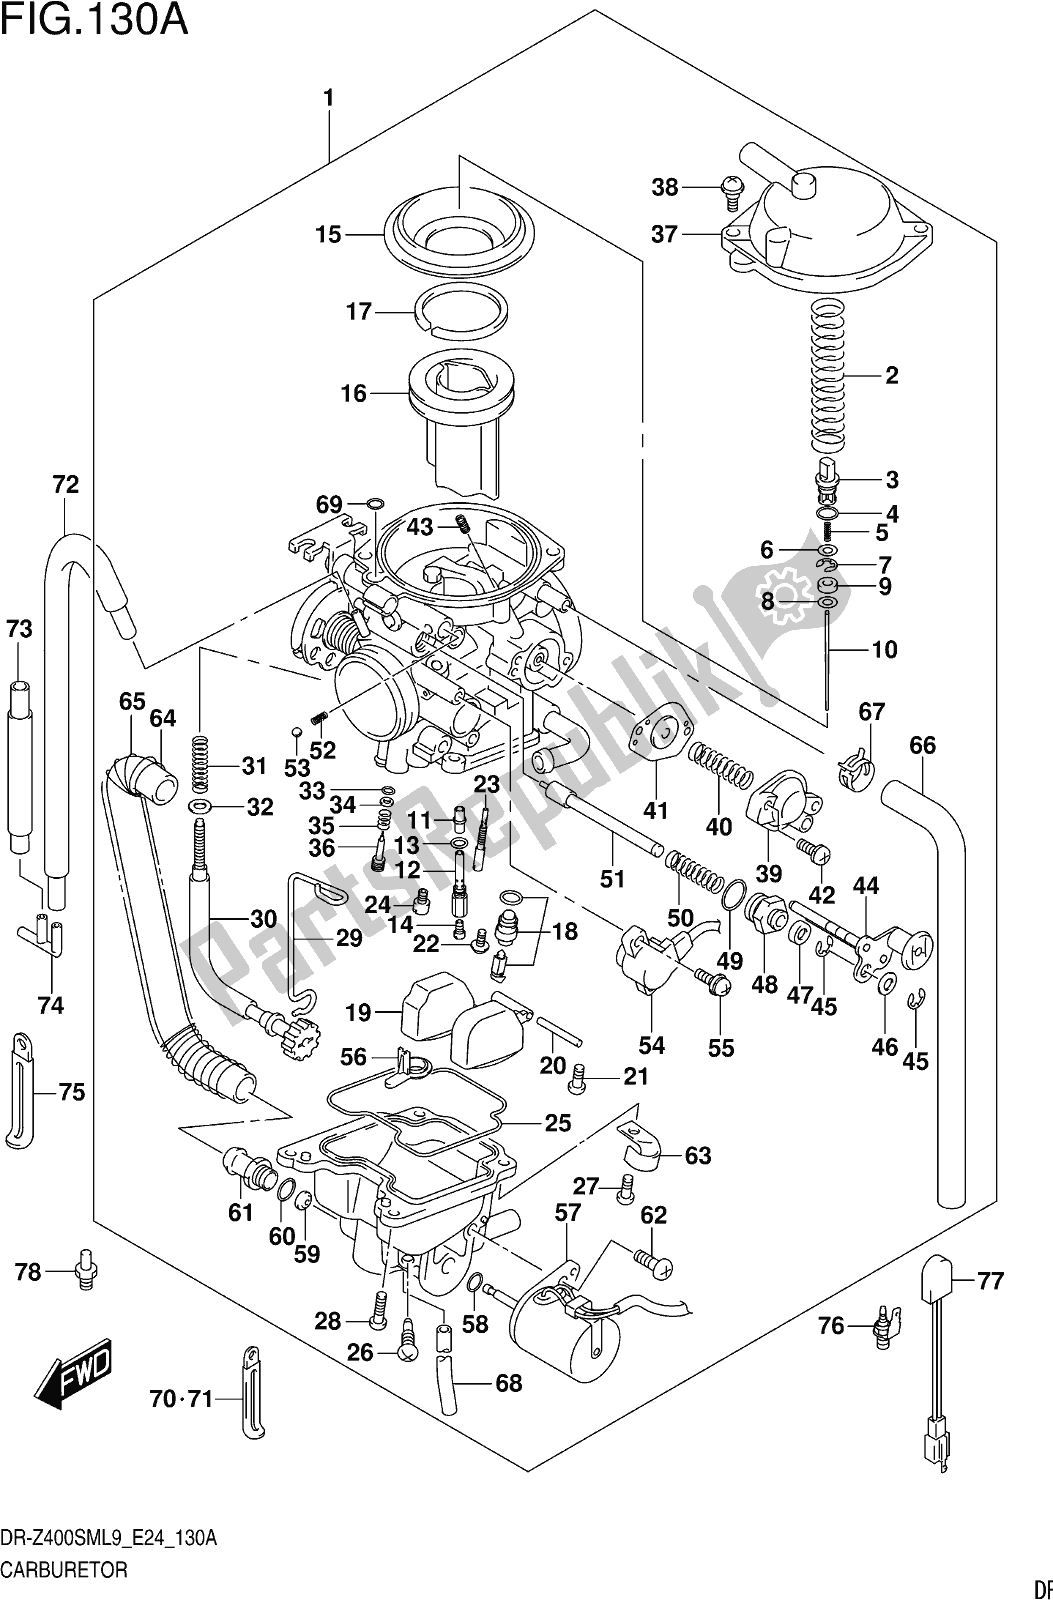 All parts for the Fig. 130a Carburetor of the Suzuki DR-Z 400 SM 2019